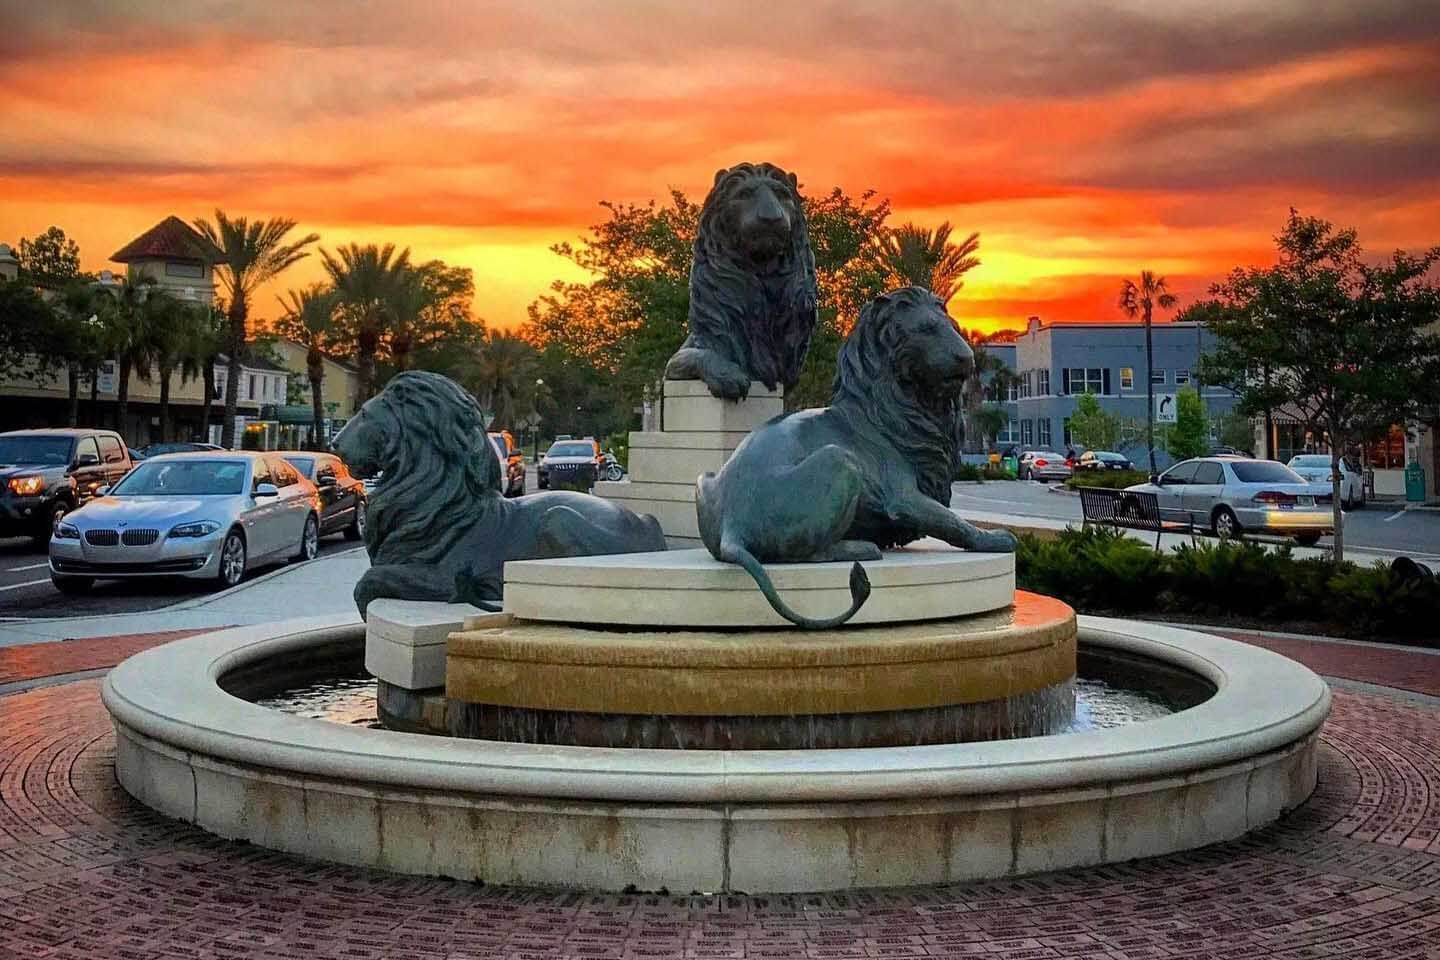 Lions and fountain at sunset